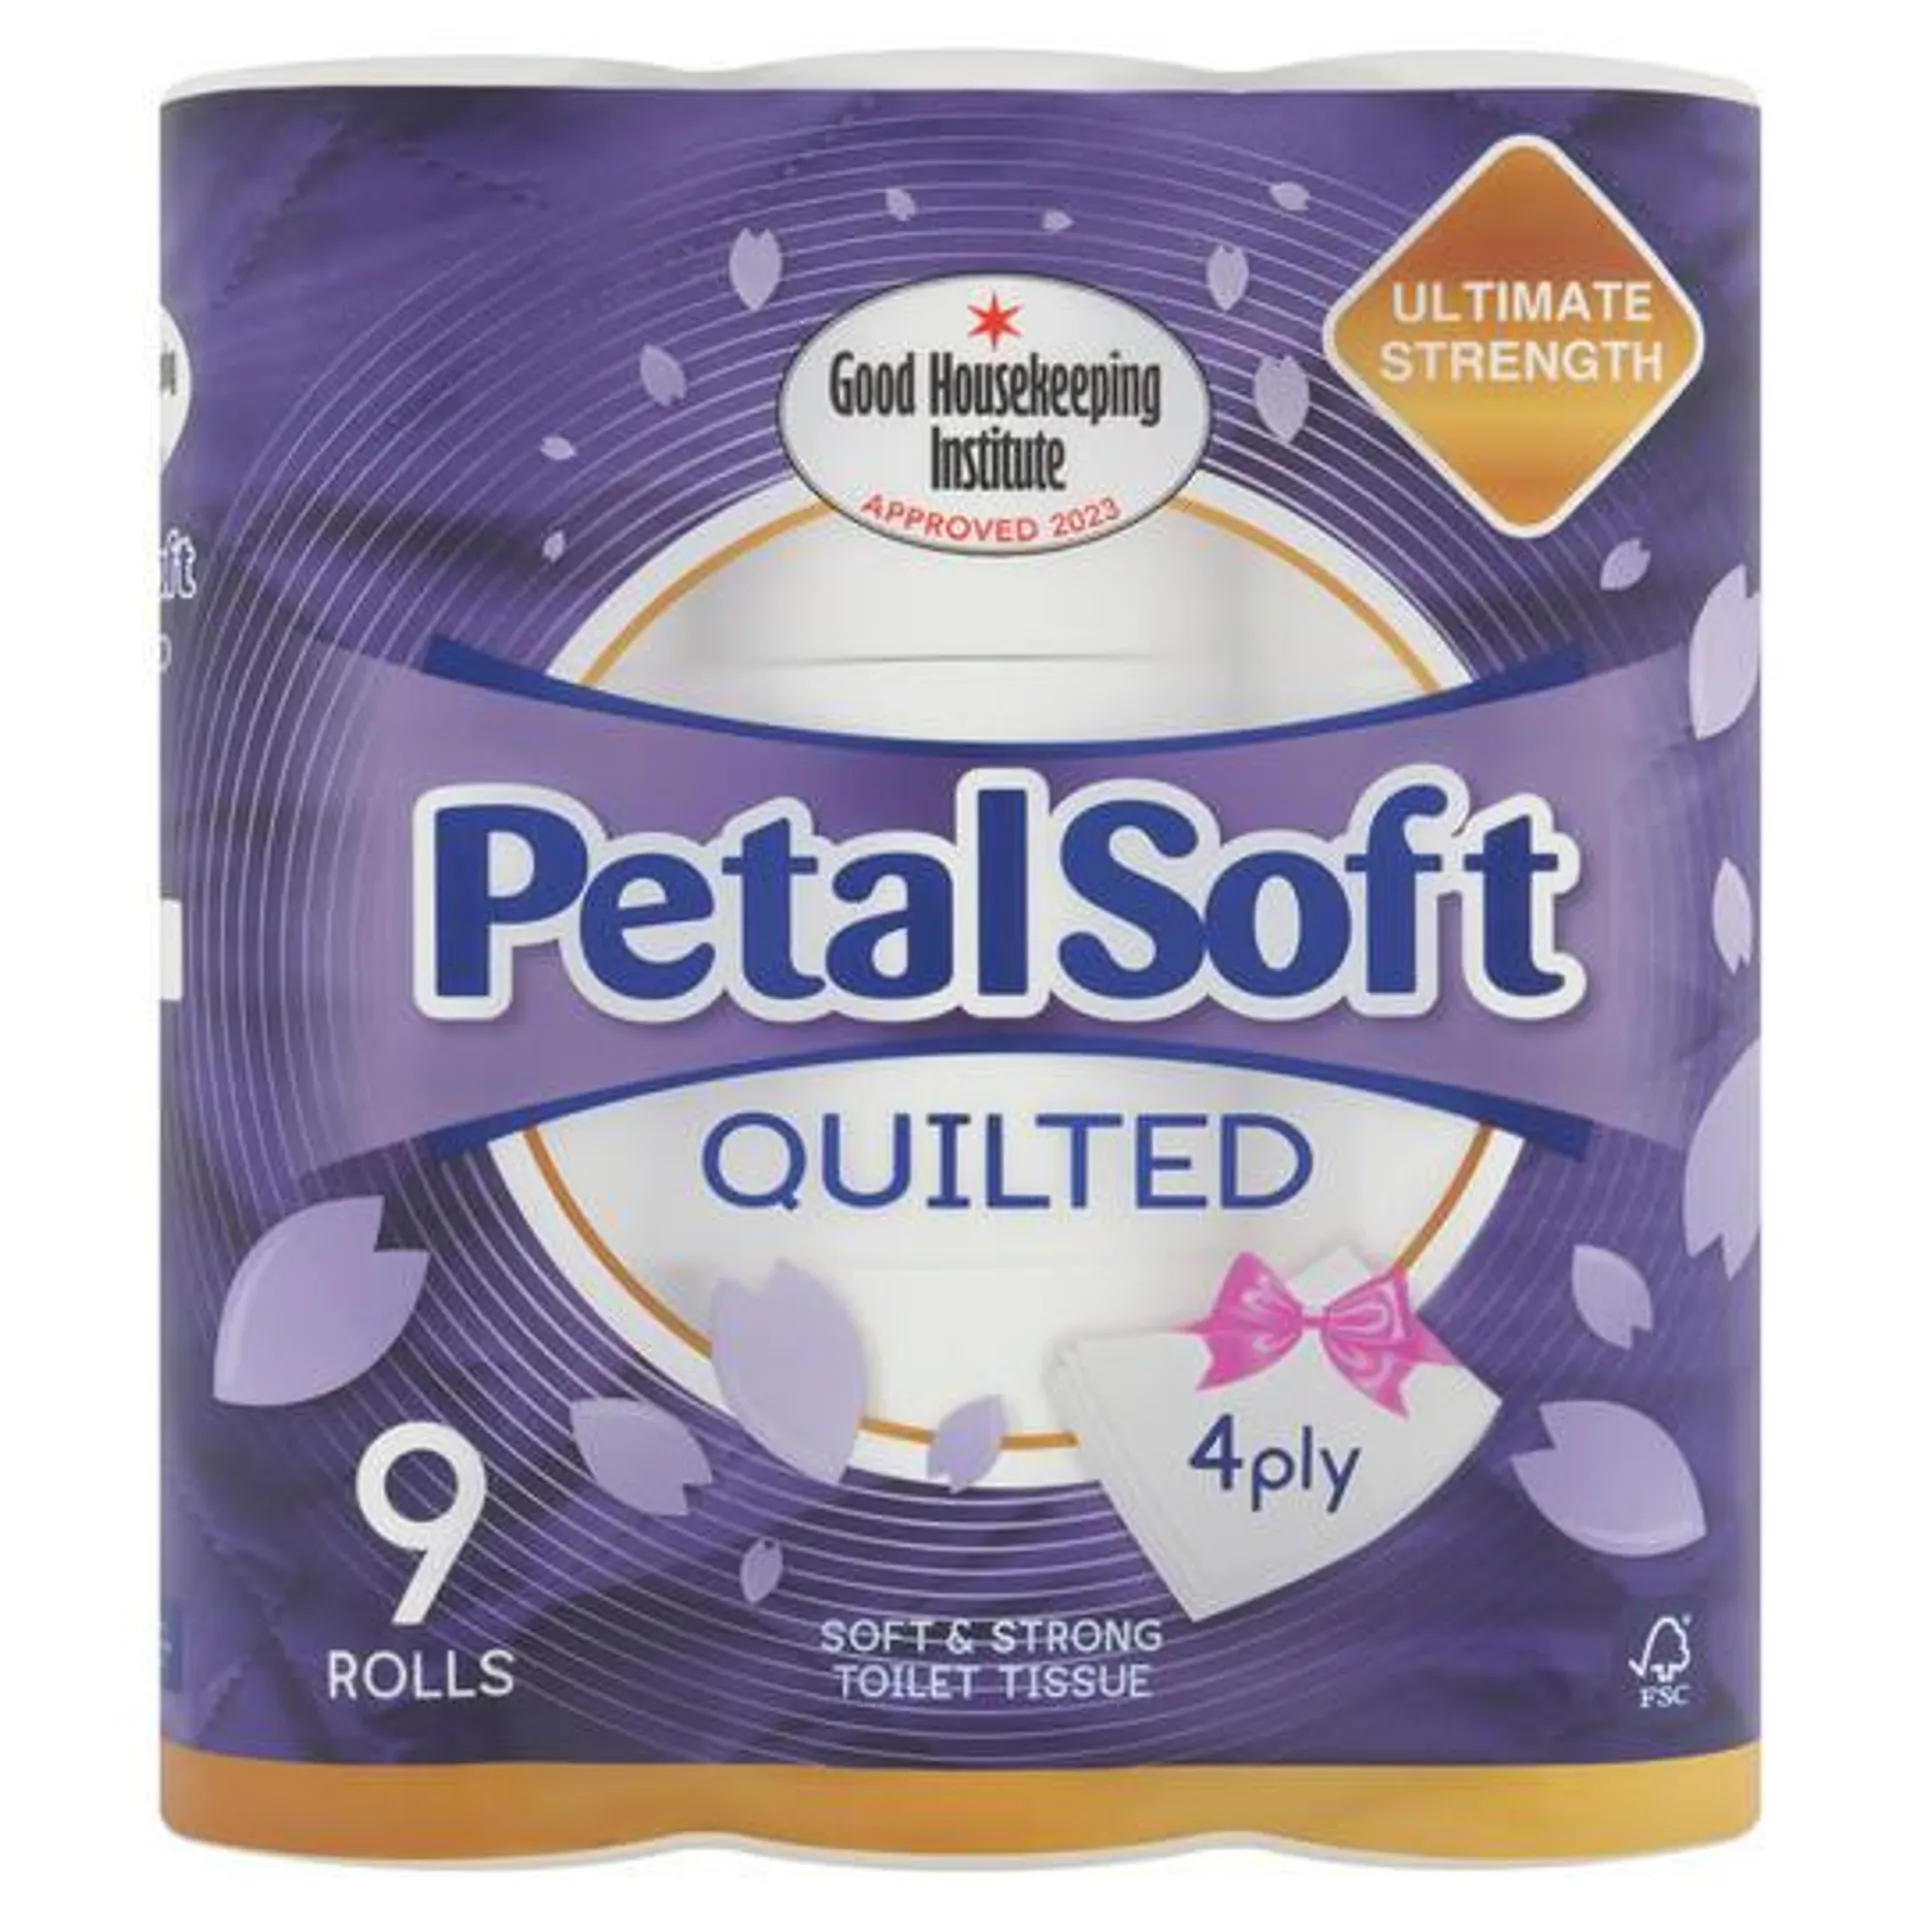 Petal Soft Quilted 4 Ply Toilet Tissue 9 Rolls